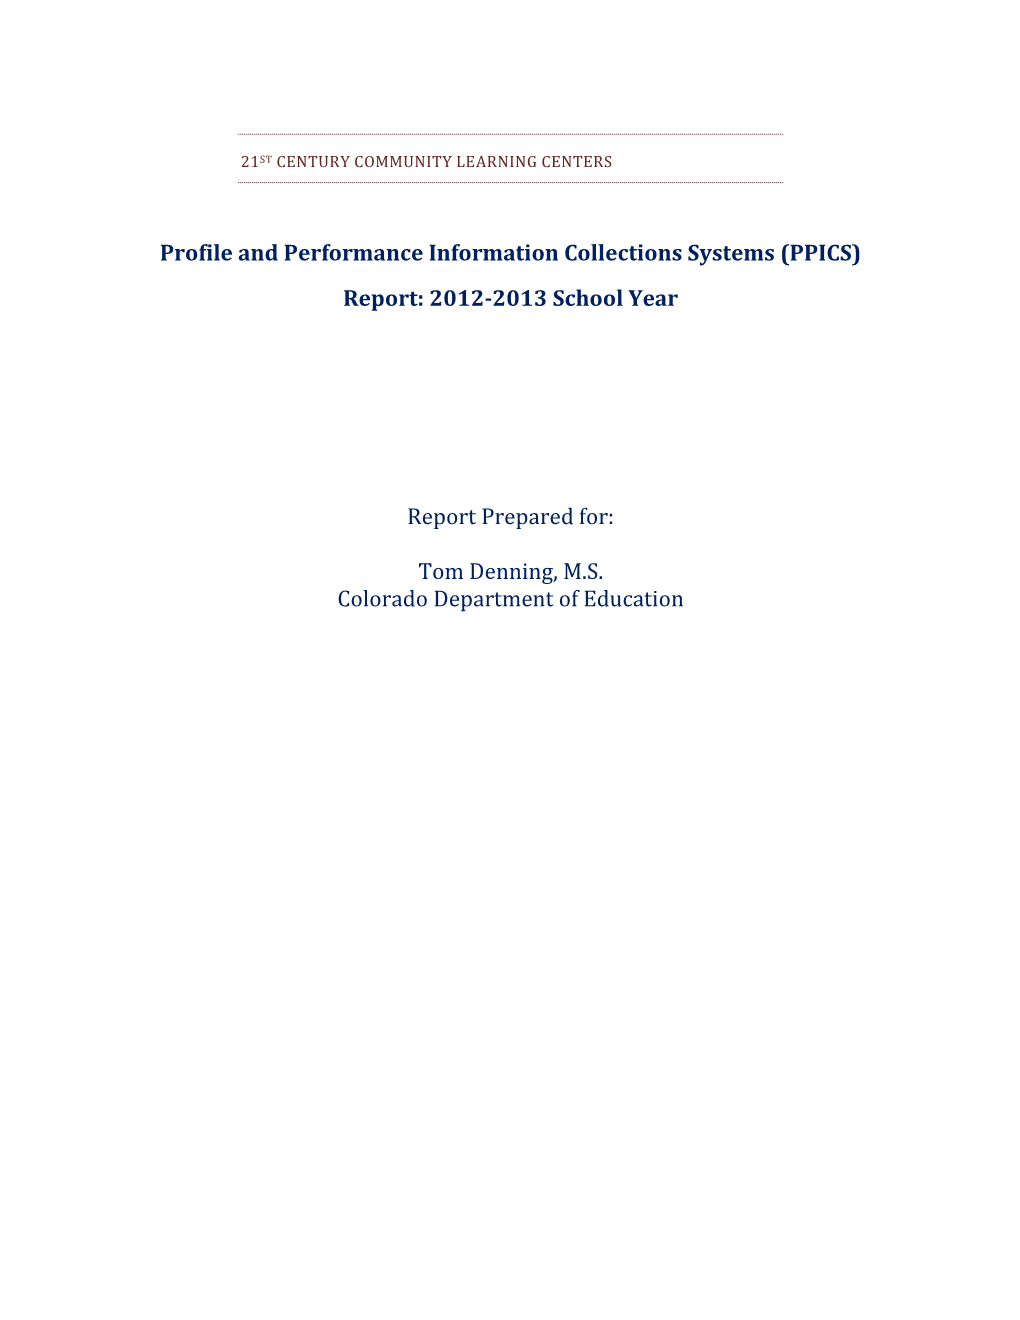 Profile and Performance Information Collections Systems (PPICS) Report: 2012-2013 School Year Report Prepared For: Tom Denning